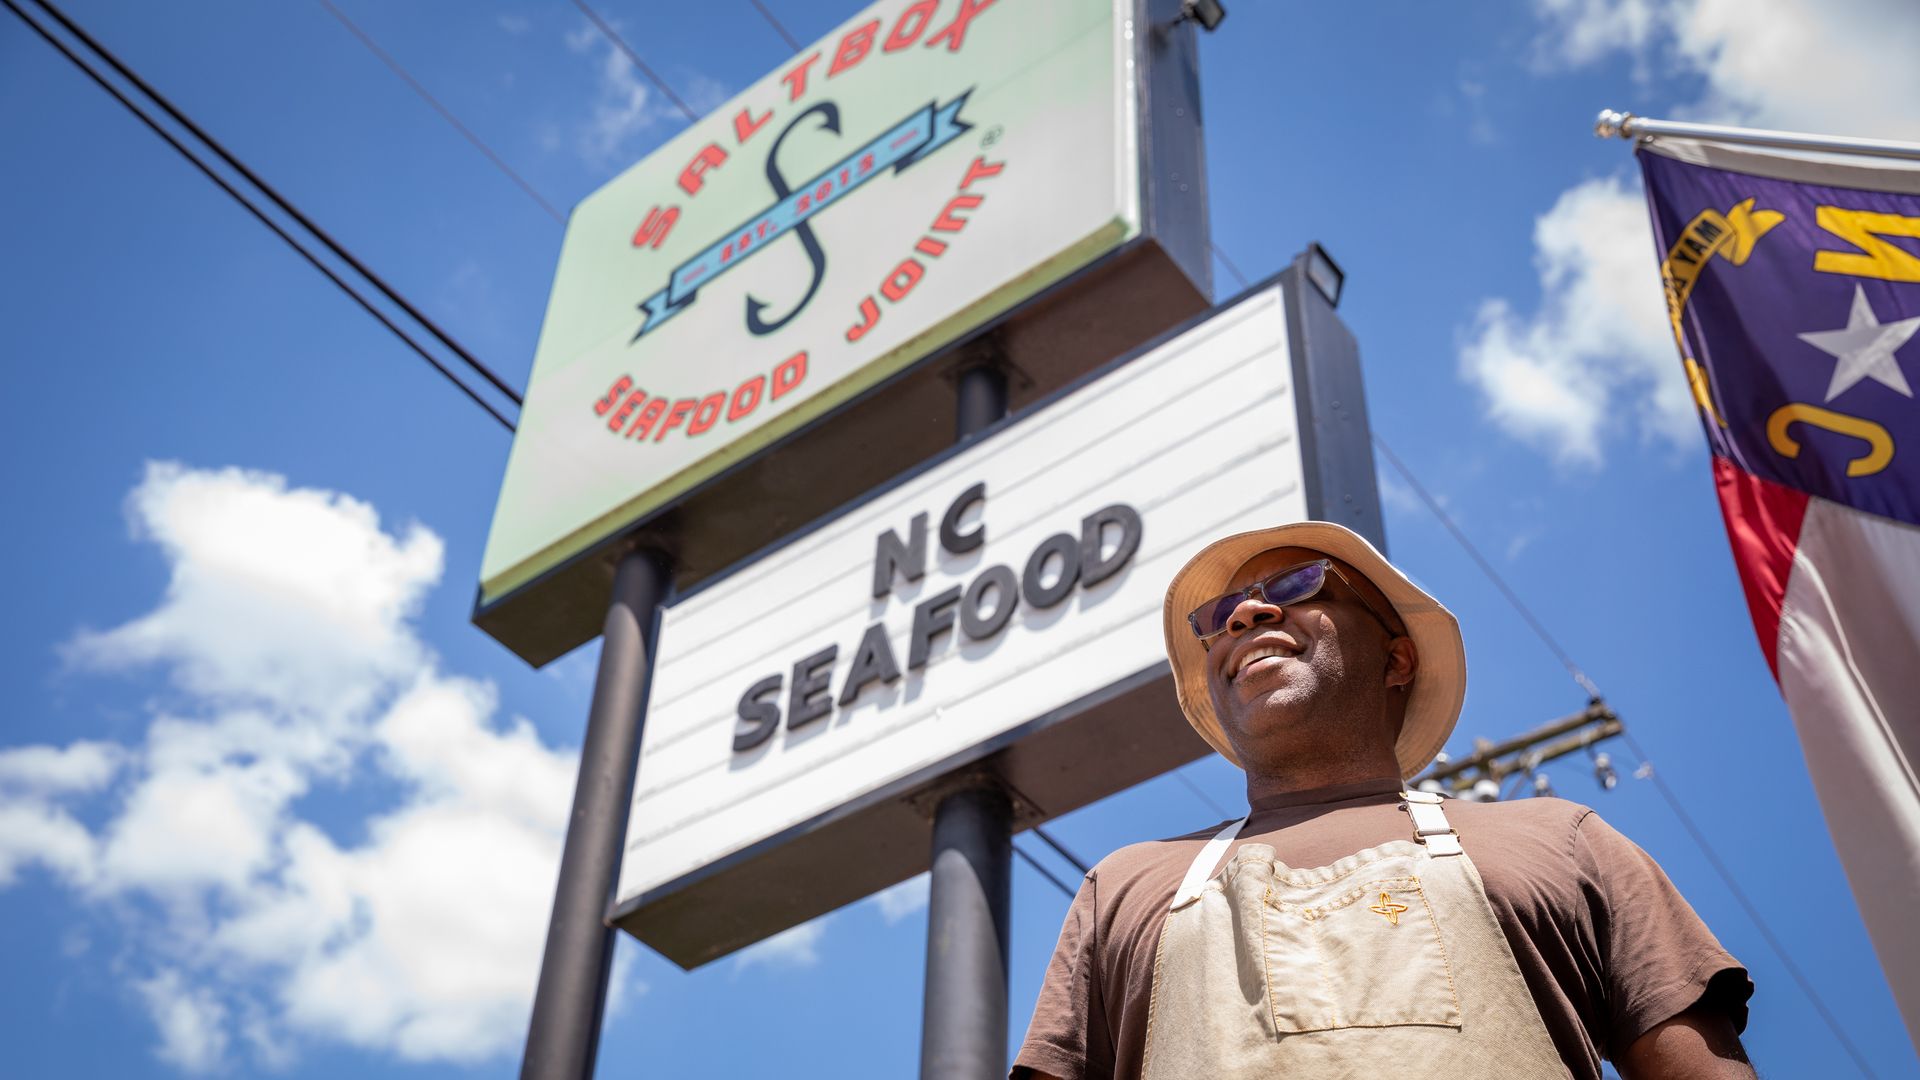 Ricky Moore stands in front of the Saltbox Seafood sign at his Durham restaurant. 